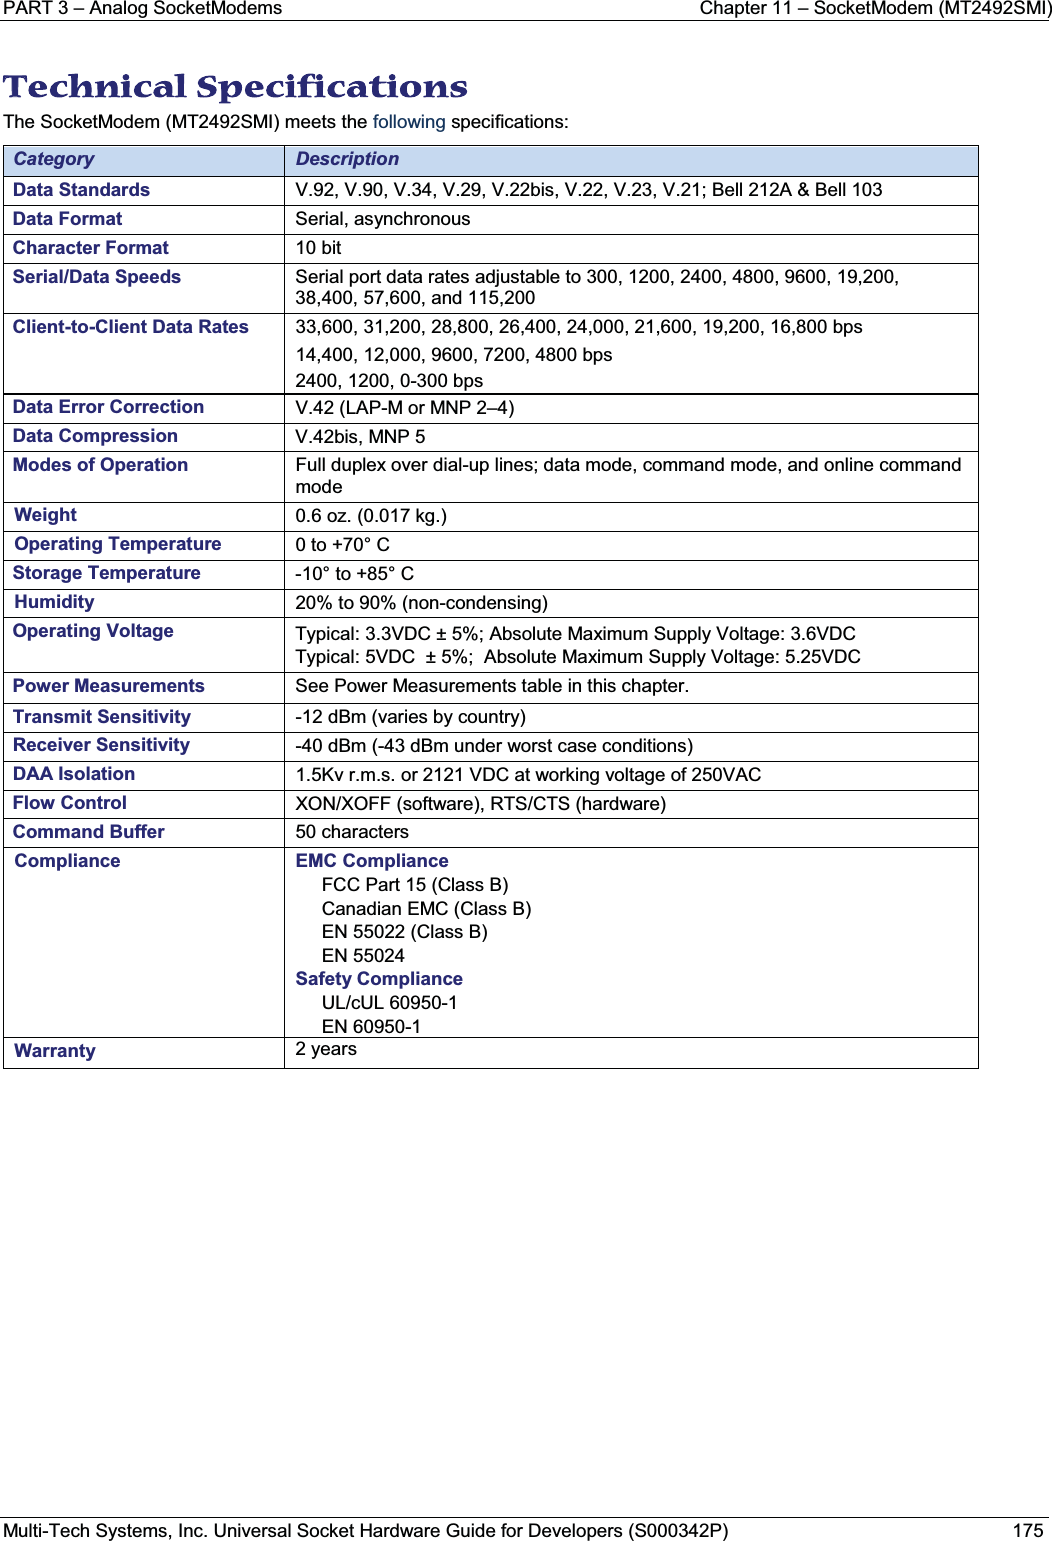 PART 3 – Analog SocketModems  Chapter 11 – SocketModem (MT2492SMI)Multi-Tech Systems, Inc. Universal Socket Hardware Guide for Developers (S000342P) 175TTechnical Specifications The SocketModem (MT2492SMI) meets the following specifications: Category DescriptionData Standards V.92, V.90, V.34, V.29, V.22bis, V.22, V.23, V.21; Bell 212A &amp; Bell 103 Data Format Serial, asynchronousCharacter Format 10 bitSerial/Data Speeds  Serial port data rates adjustable to 300, 1200, 2400, 4800, 9600, 19,200, 38,400, 57,600, and 115,200Client-to-Client Data Rates 33,600, 31,200, 28,800, 26,400, 24,000, 21,600, 19,200, 16,800 bps14,400, 12,000, 9600, 7200, 4800 bps2400, 1200, 0-300 bpsData Error Correction V.42 (LAP-M or MNP 2–4)Data Compression V.42bis, MNP 5Modes of Operation Full duplex over dial-up lines; data mode, command mode, and online command modeWeight 0.6 oz. (0.017 kg.) Operating Temperature  0 to +70° C  Storage Temperature -10° to +85° CHumidity 20% to 90% (non-condensing)Operating Voltage Typical: 3.3VDC ± 5%; Absolute Maximum Supply Voltage: 3.6VDCTypical: 5VDC  ± 5%;  Absolute Maximum Supply Voltage: 5.25VDCPower Measurements See Power Measurements table in this chapter.Transmit Sensitivity -12 dBm (varies by country)Receiver Sensitivity -40 dBm (-43 dBm under worst case conditions)DAA Isolation 1.5Kv r.m.s. or 2121 VDC at working voltage of 250VACFlow Control XON/XOFF (software), RTS/CTS (hardware)Command Buffer 50 charactersCompliance EMC ComplianceFCC Part 15 (Class B)Canadian EMC (Class B)EN 55022 (Class B)EN 55024Safety ComplianceUL/cUL 60950-1EN 60950-1Warranty 2 years